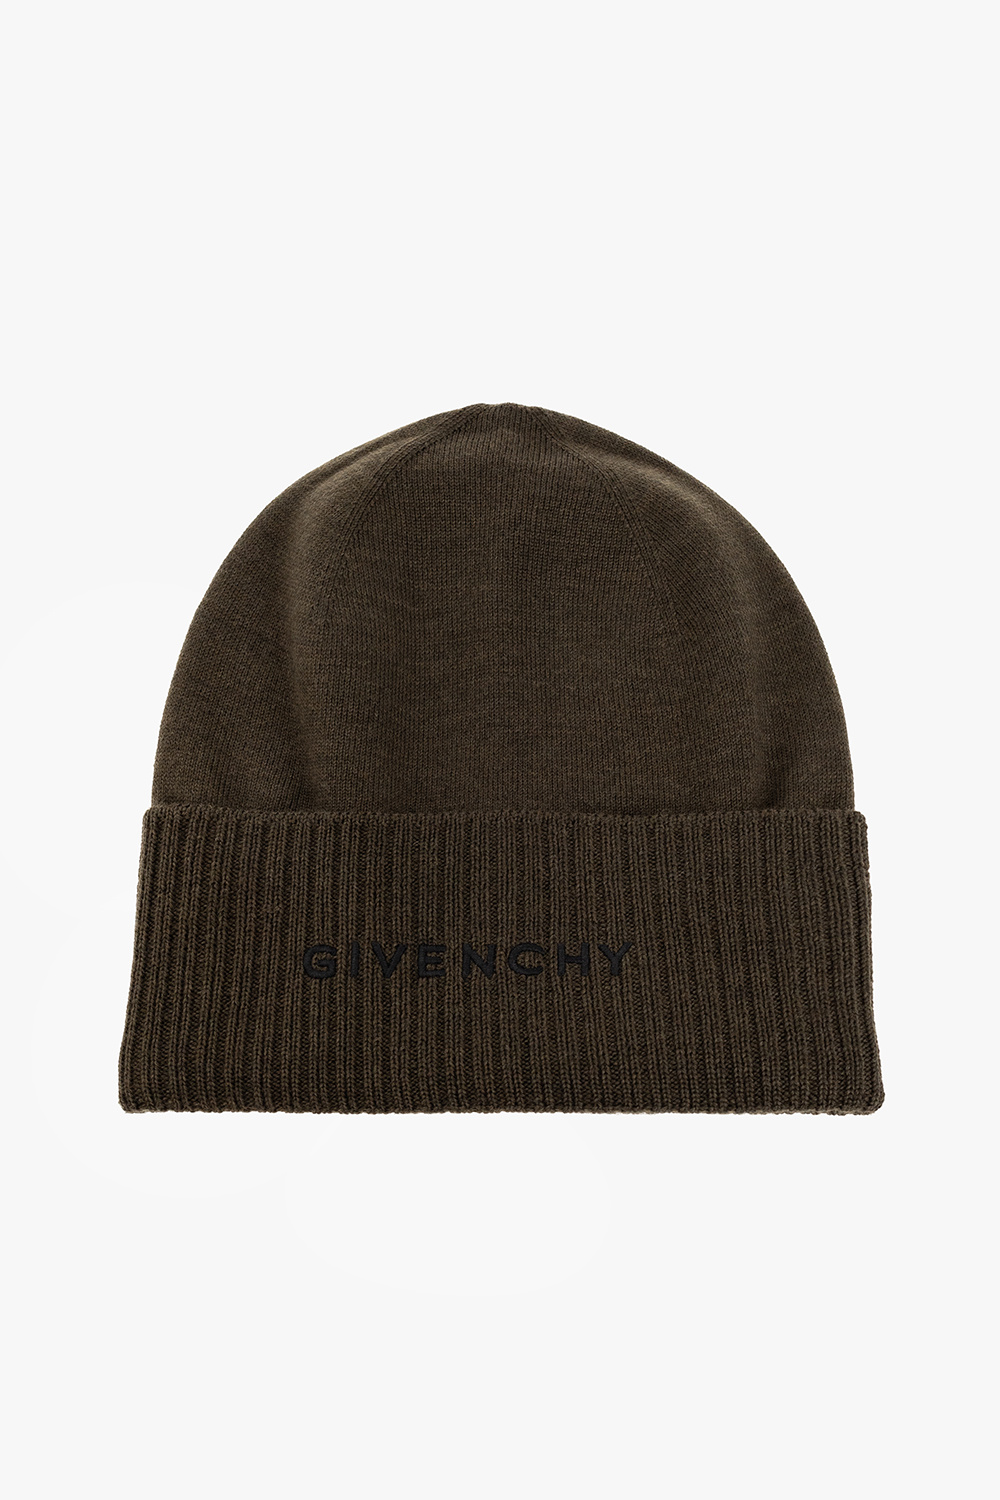 Givenchy Kids embroidered-logo knitted beanie hat - Black